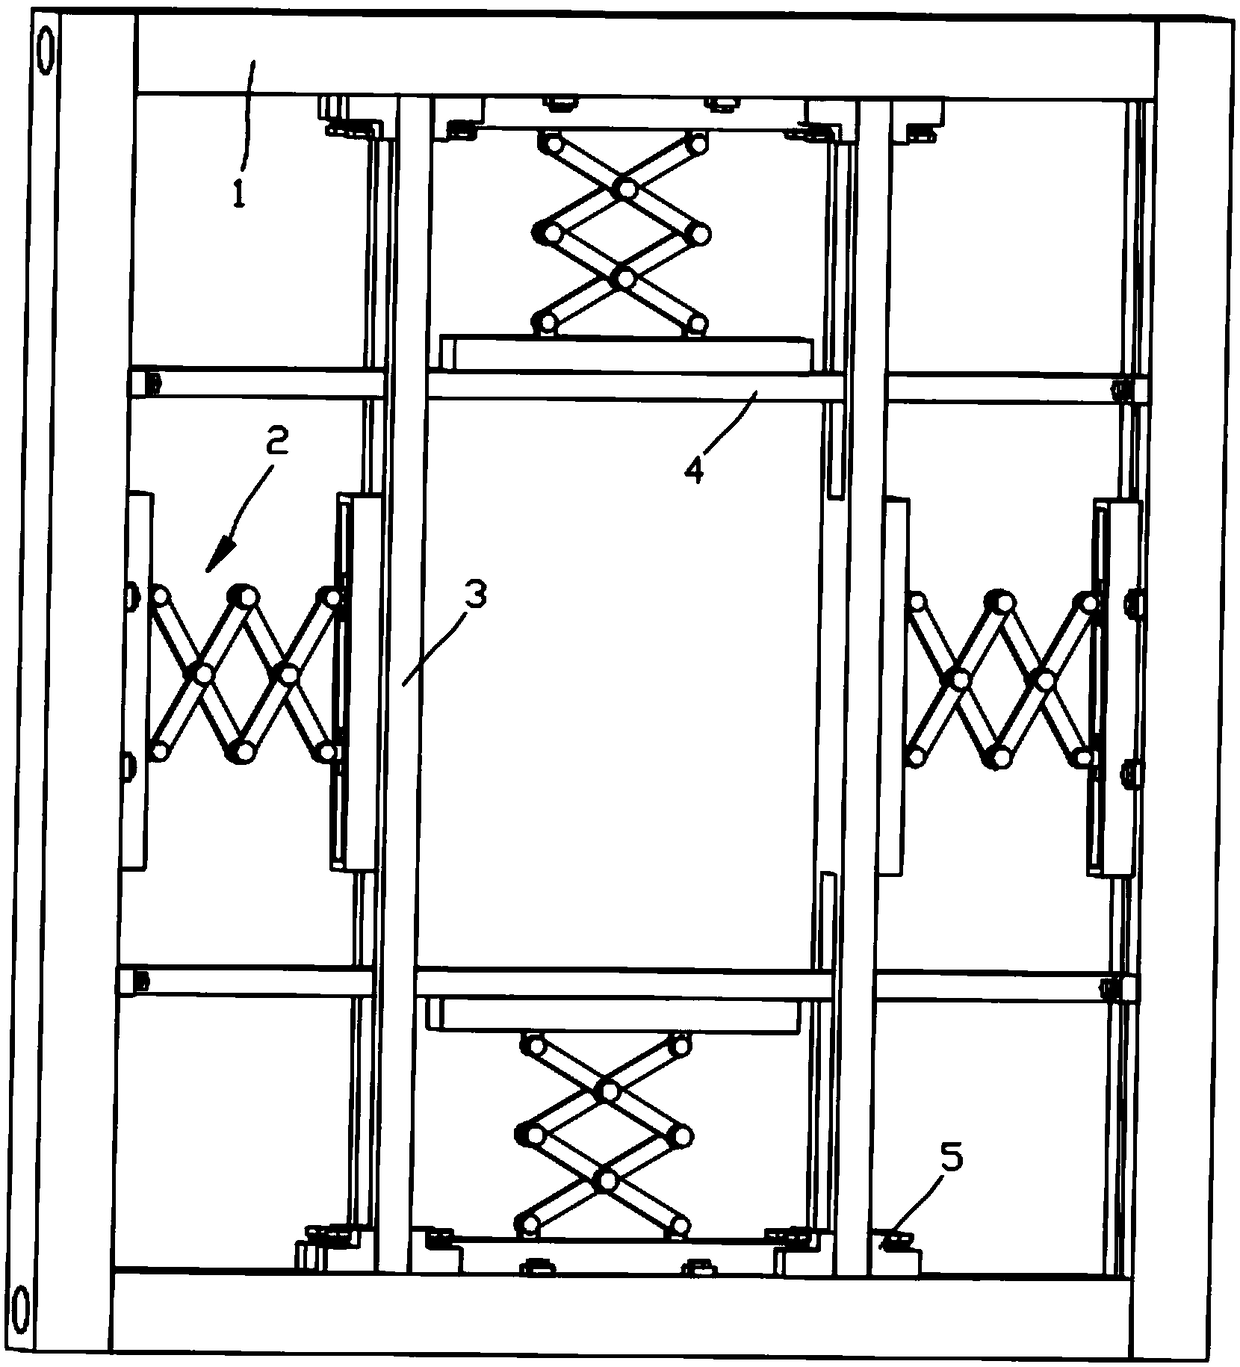 Connecting structure of preserved wall face of assembled building window and window of wall face